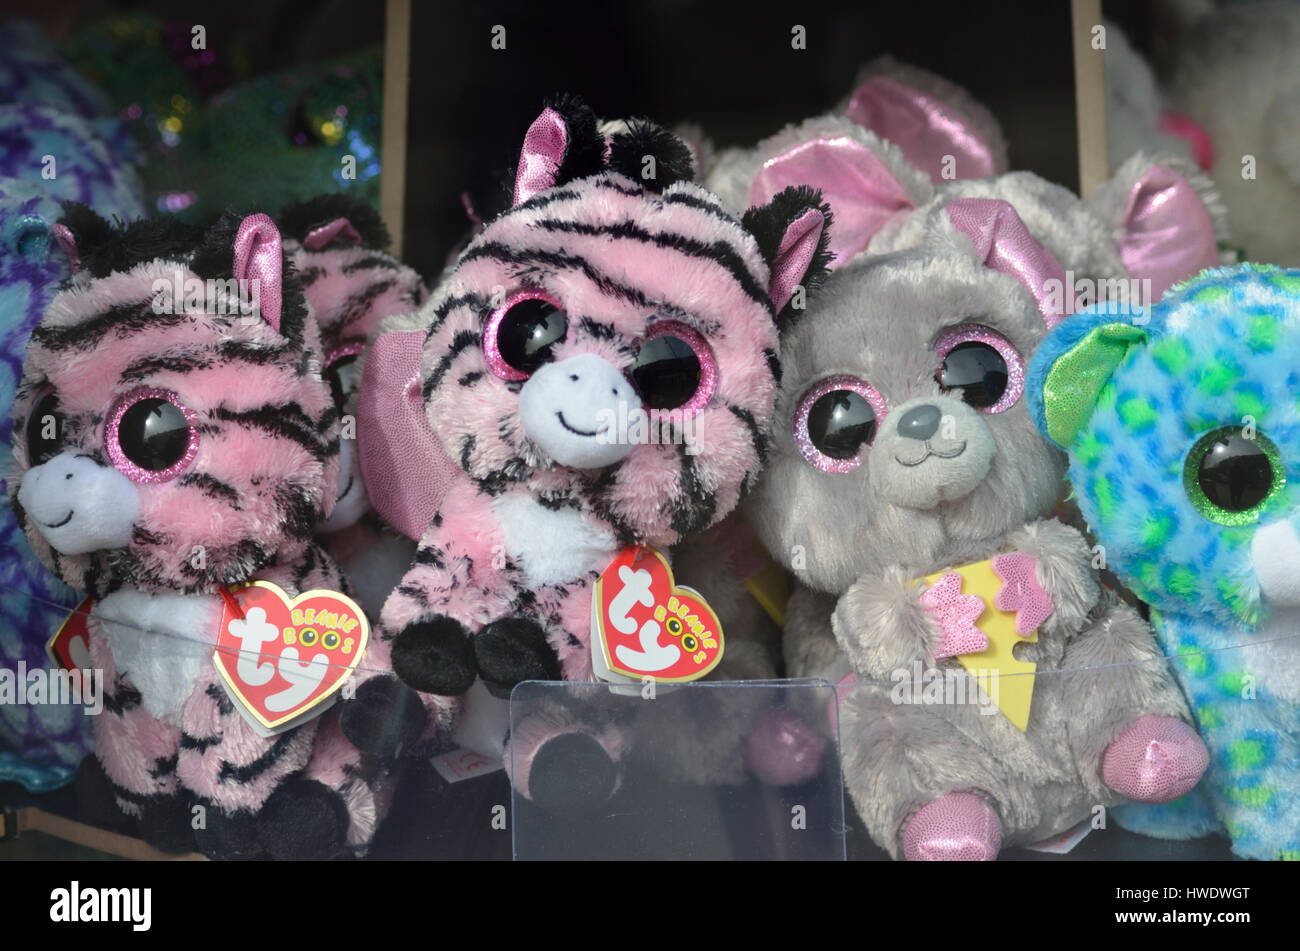 Cuddly toys in a shop window display. Stock Photo